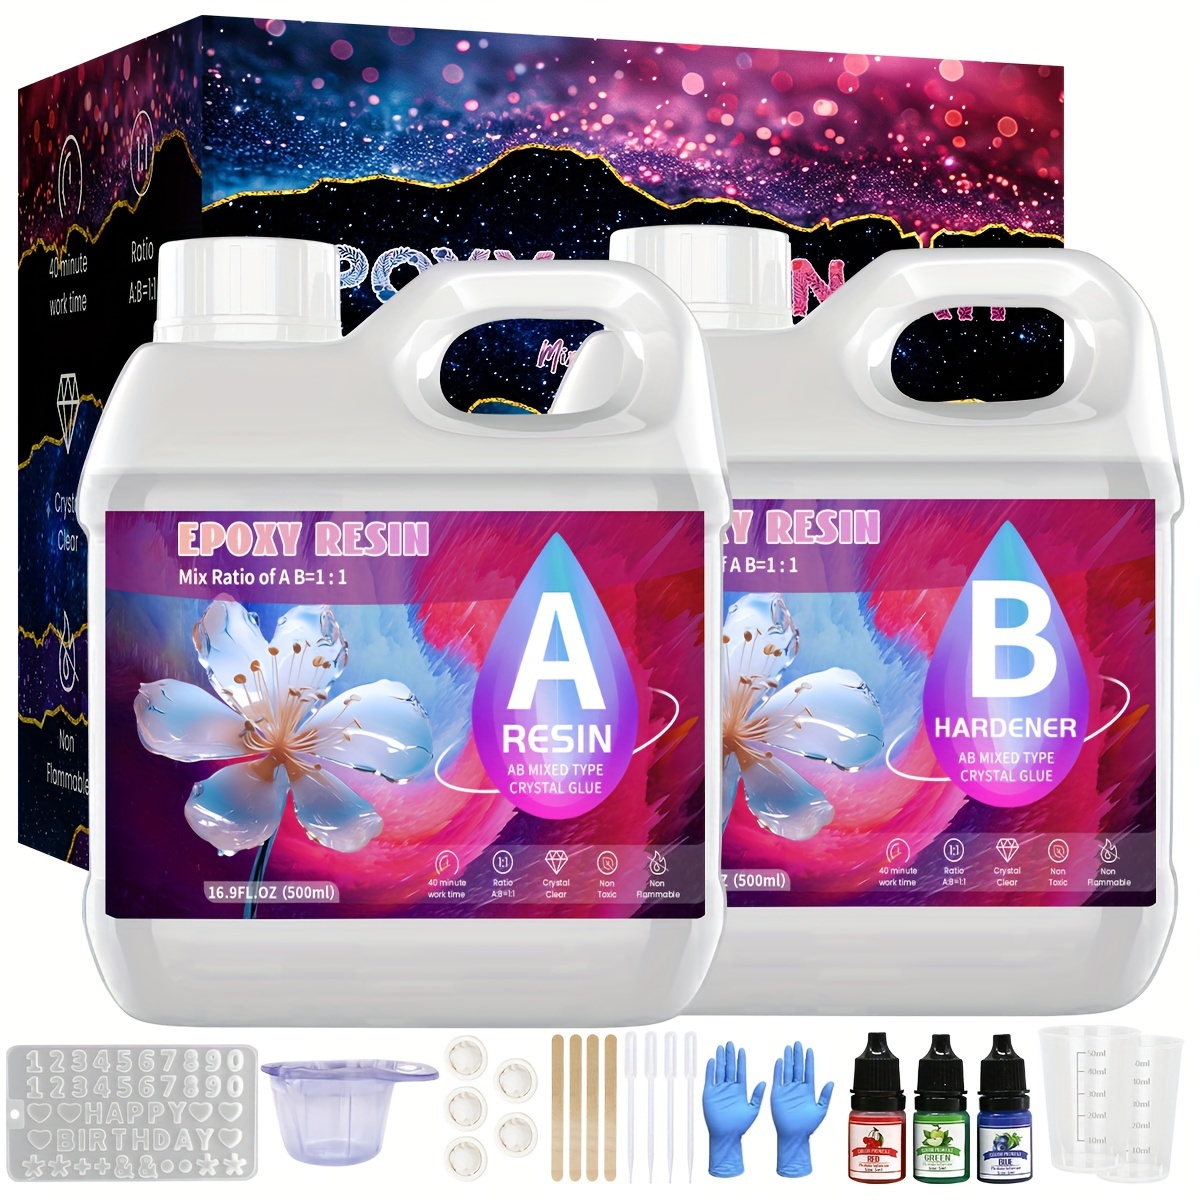 

Epoxy Resin Kit, Crystal Clear Fast-setting Low-odor Non-shrinking, Uv-resistant Ab Glue For Diy Crafts With Box, Gloves, Droppers, Stir Sticks, Pigments - 4 Sizes (50ml/100ml/250ml/500ml) Set